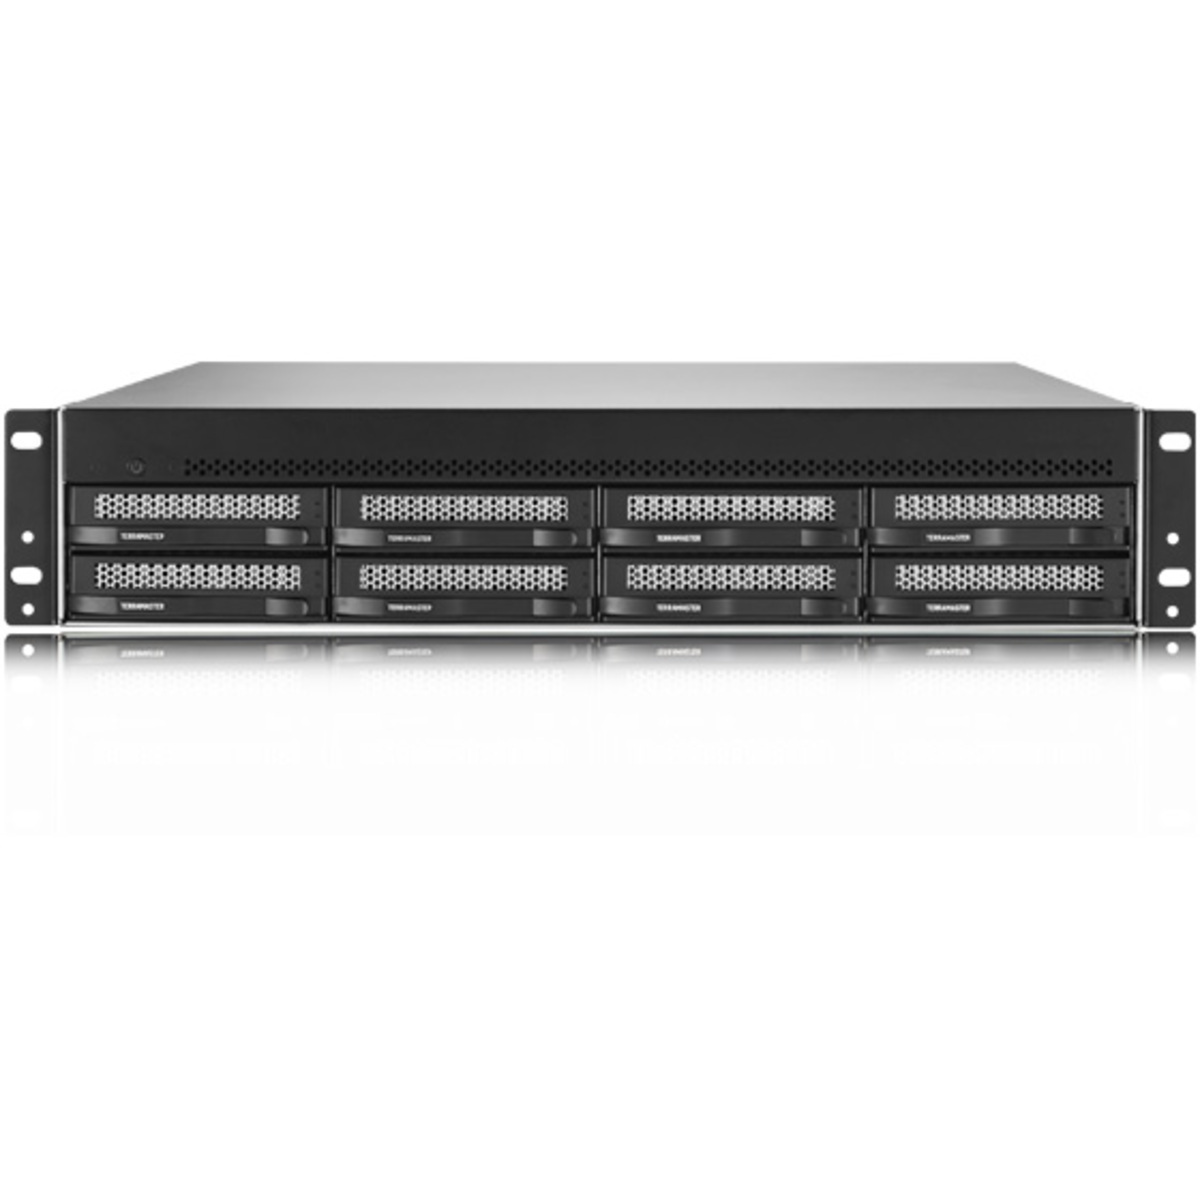 TerraMaster U8-450 84tb 8-Bay RackMount Multimedia / Power User / Business NAS - Network Attached Storage Device 6x14tb Seagate EXOS X18 ST14000NM000J 3.5 7200rpm SATA 6Gb/s HDD ENTERPRISE Class Drives Installed - Burn-In Tested U8-450